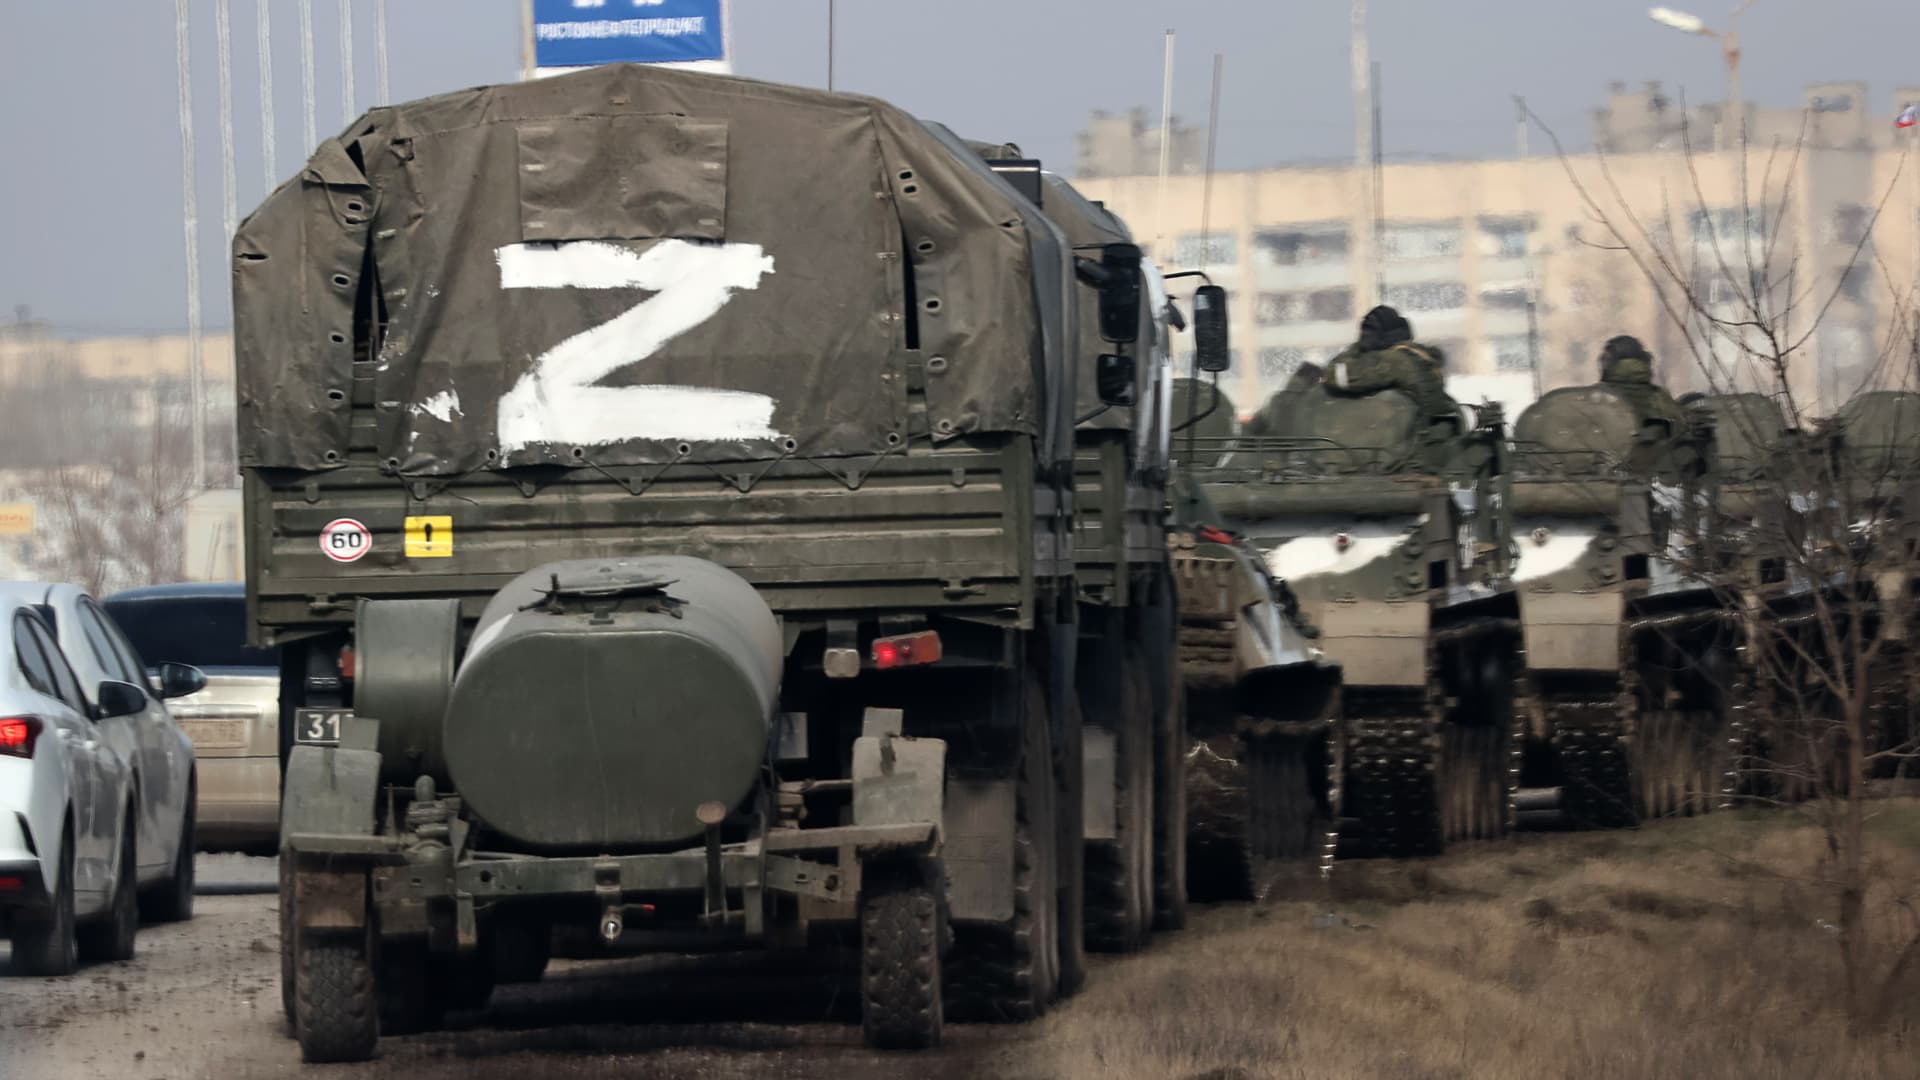 A column of army trucks moves across the town of Armyansk, northern Crimea. Early on February 24, President Putin announced a special military operation to be conducted by the Russian Armed Forces in response to appeals for help from the leaders of the Donetsk and Lugansk People's Republics.